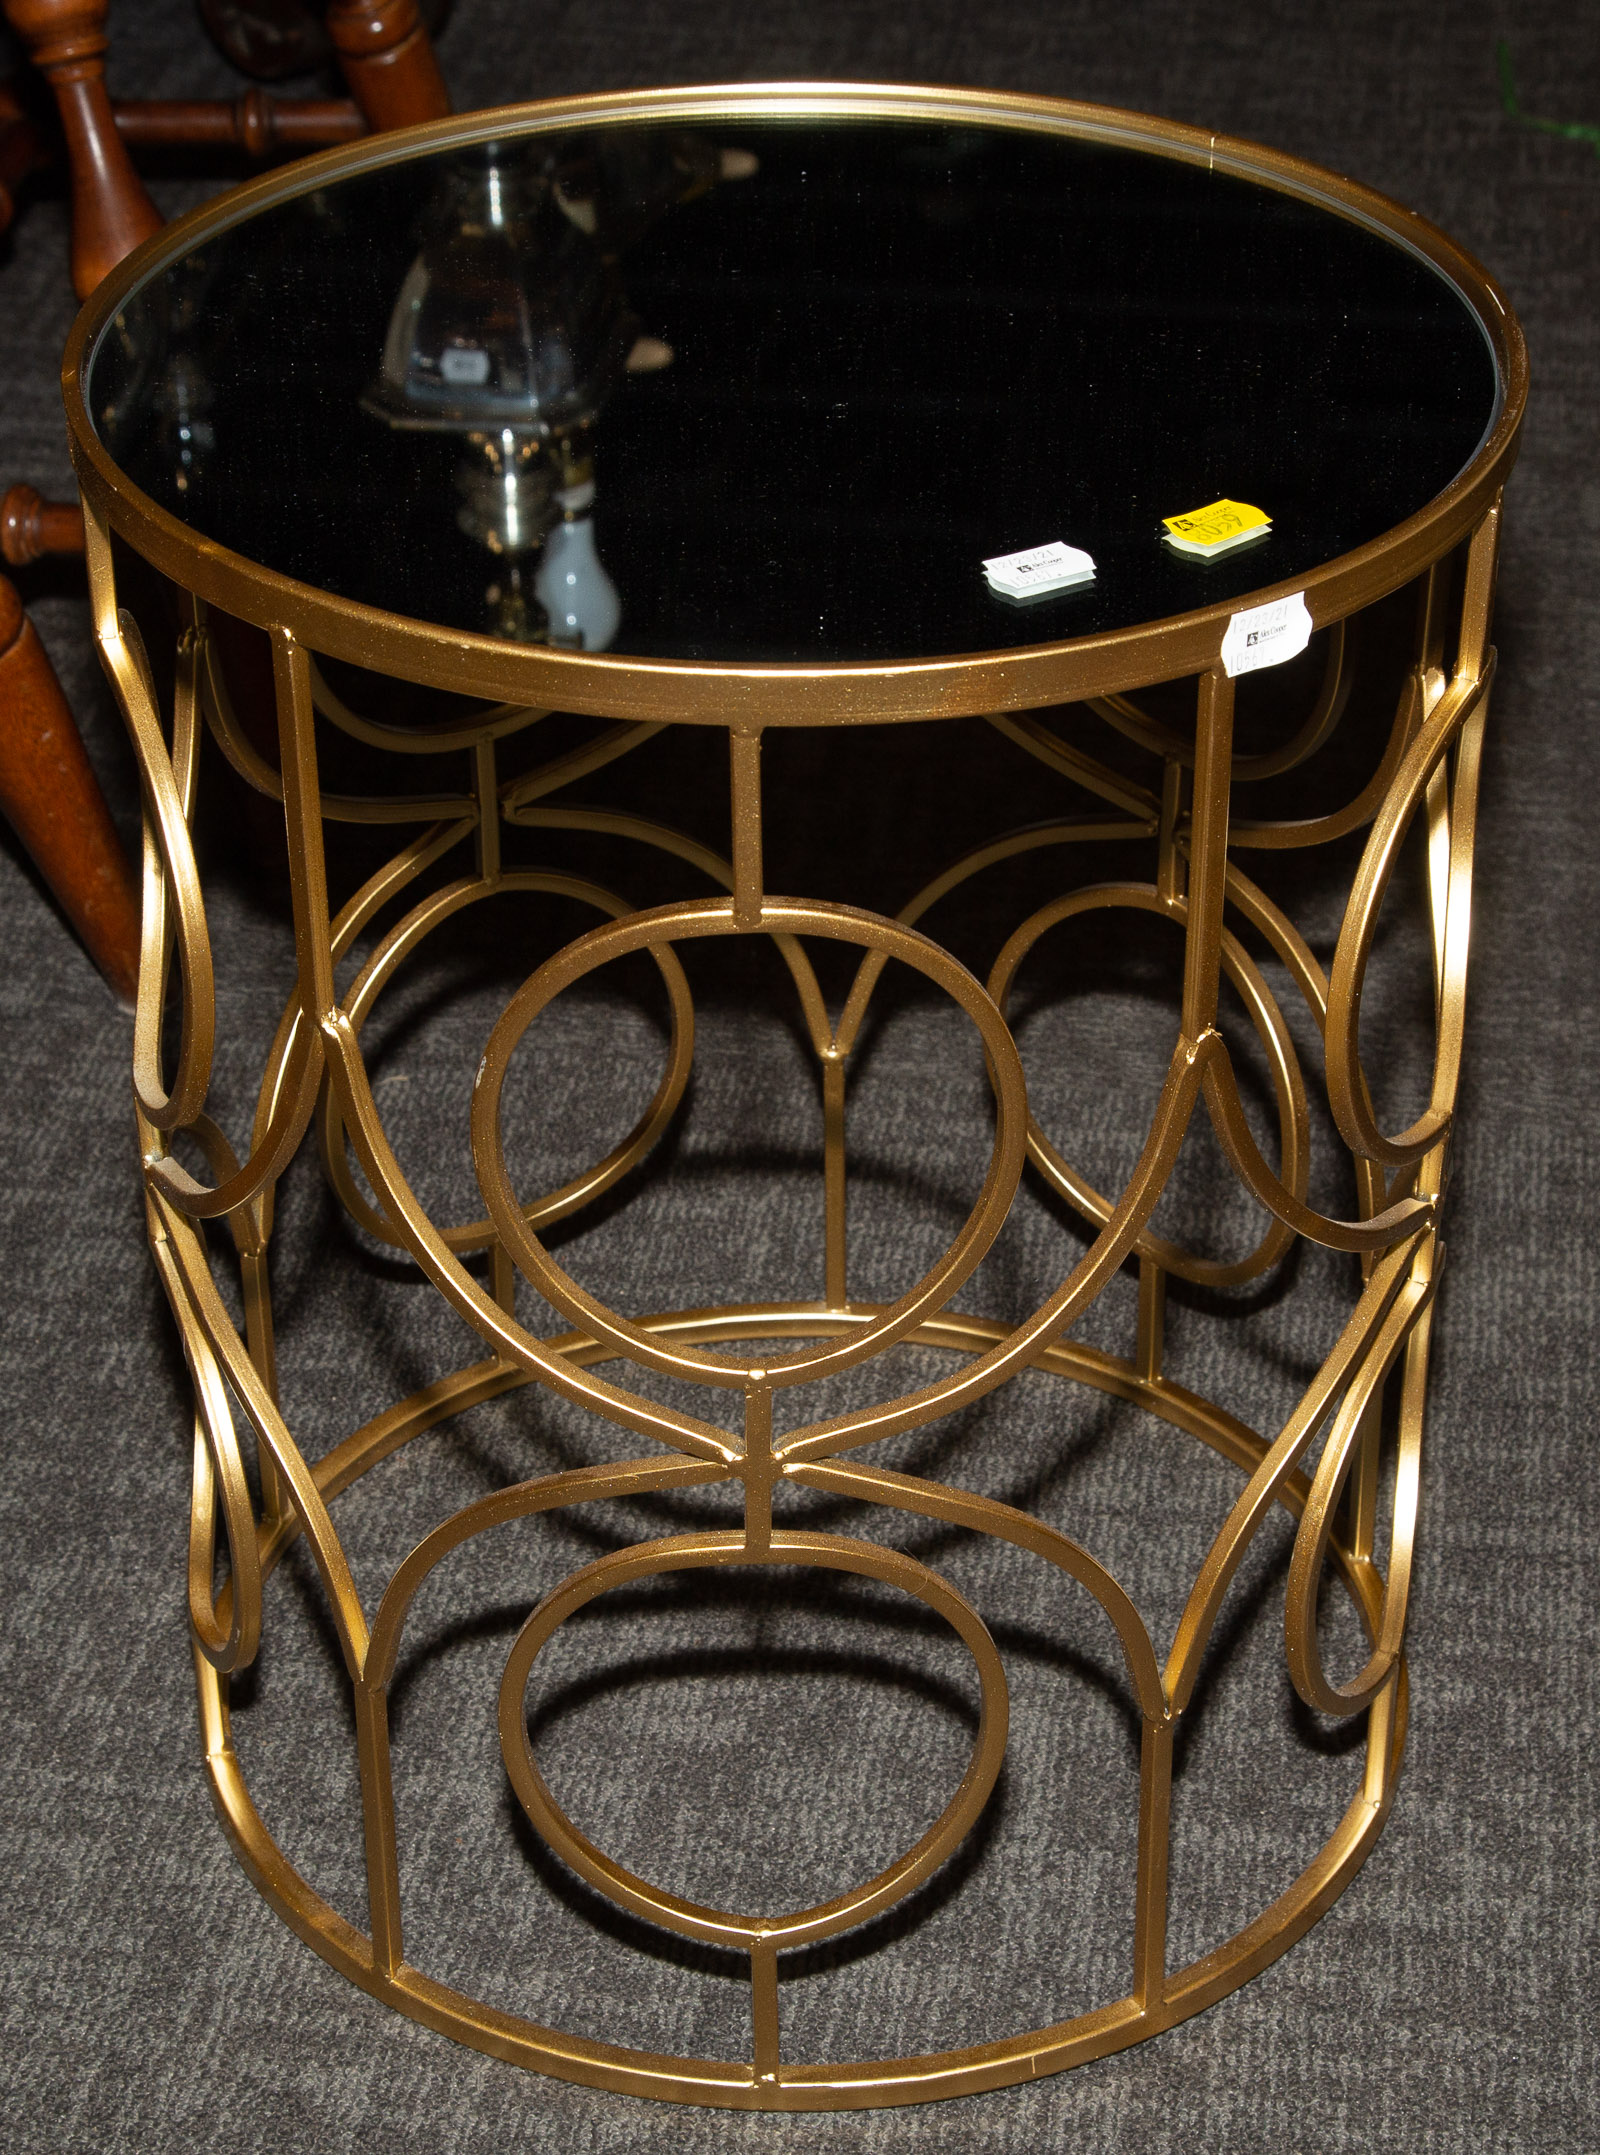 MODERN STYLE METAL END TABLE WITH 28837a